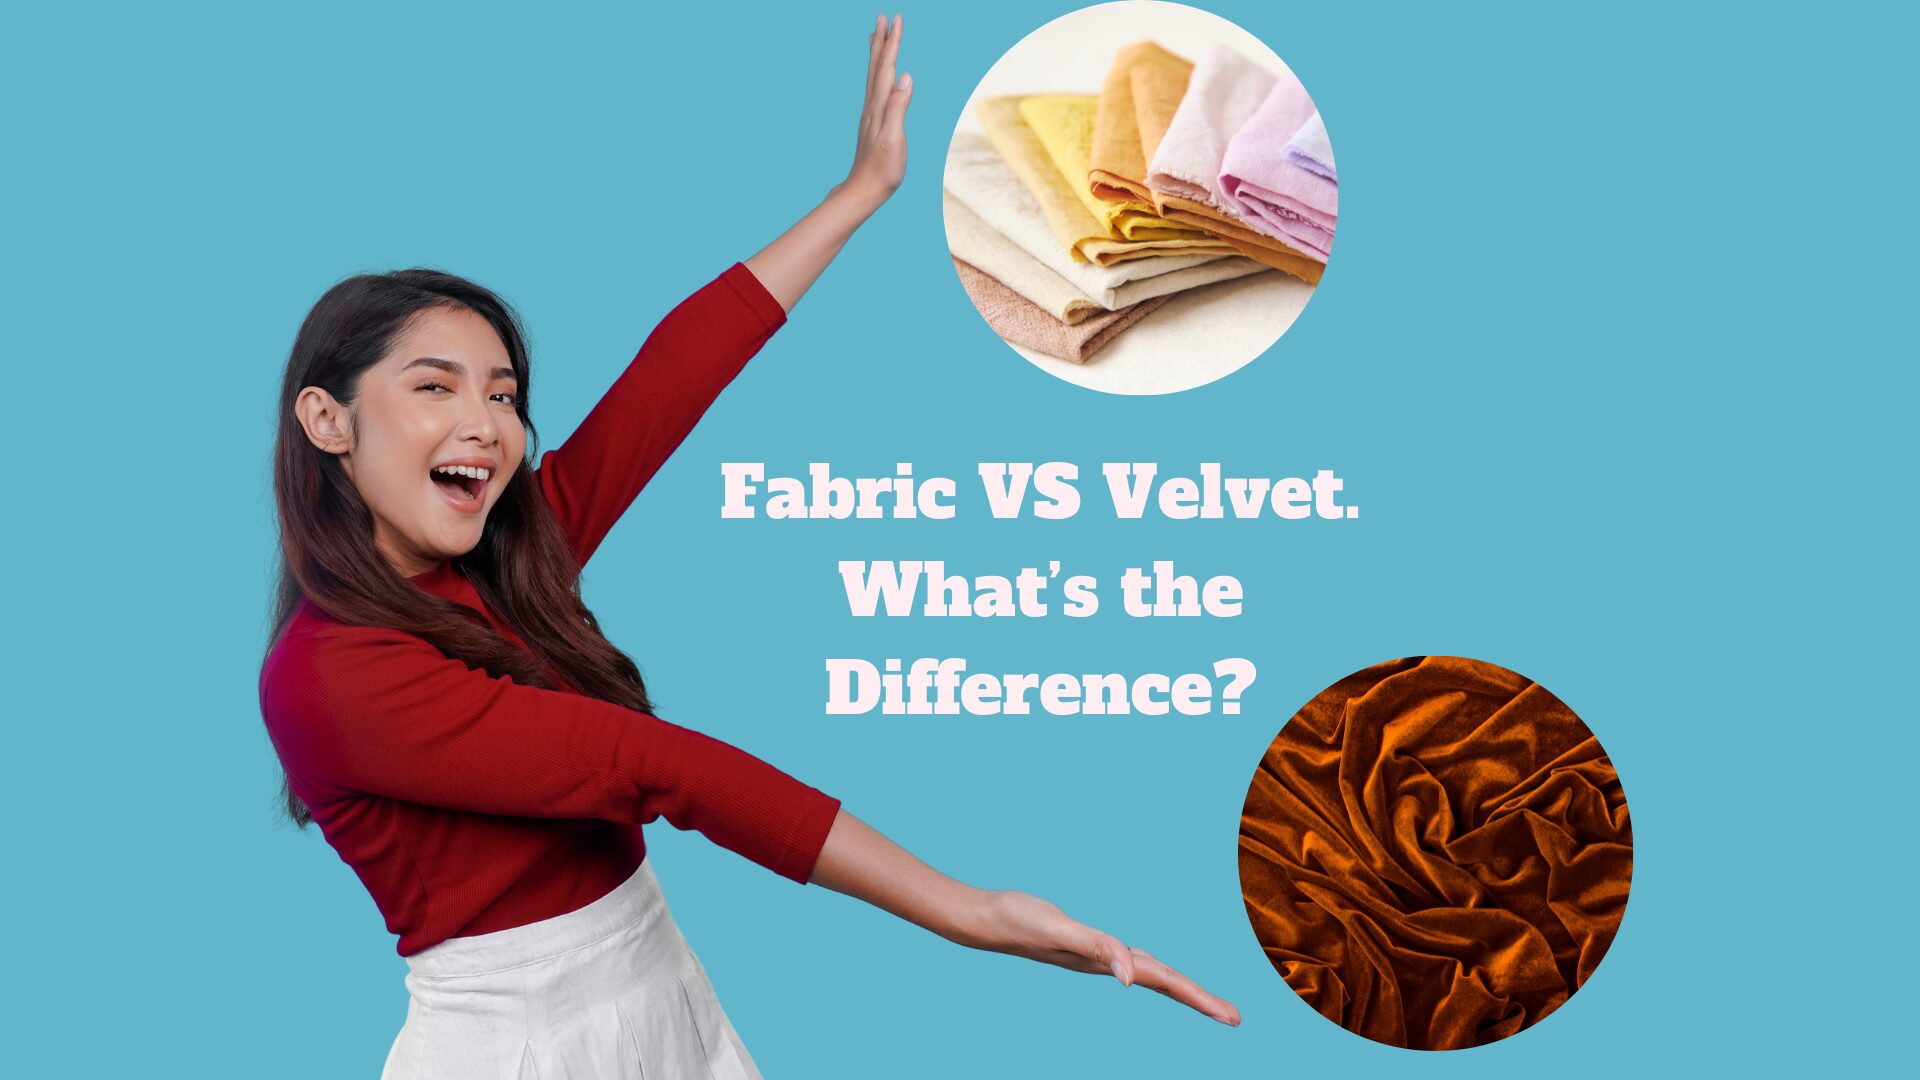 What is the Difference Between Fabric and Velvet